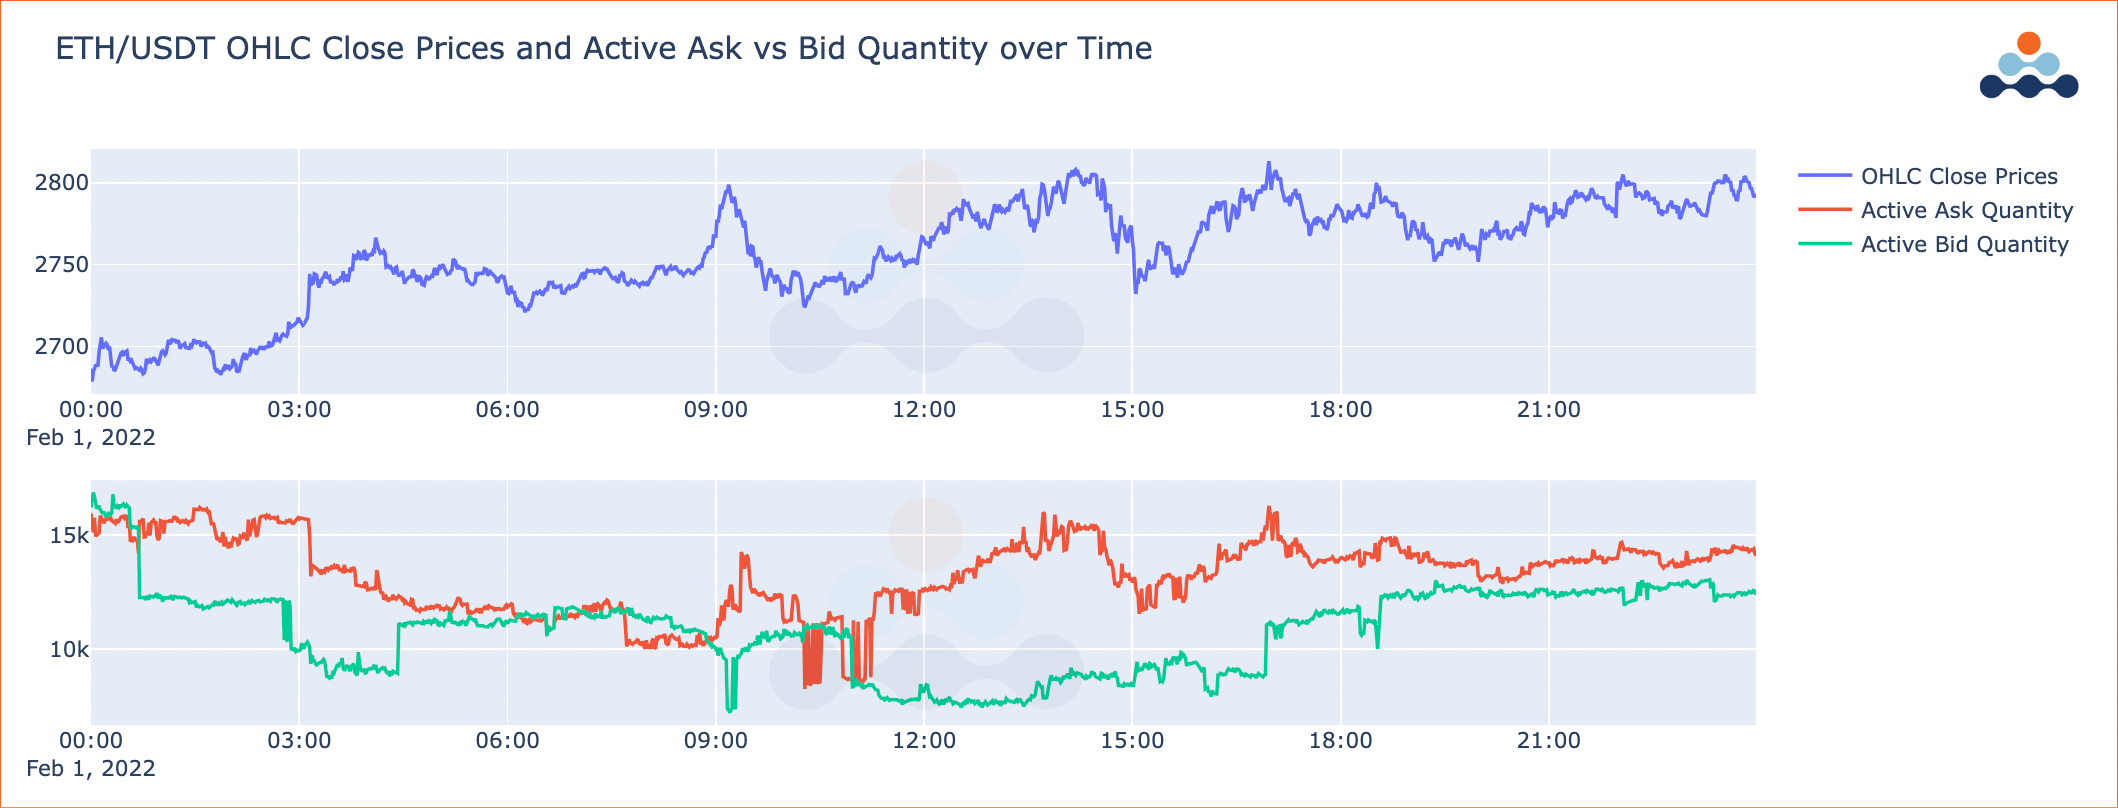 Amberdata ETH/USDT OHLC Close Prices and Active Ask vs Bid Quantity over Time